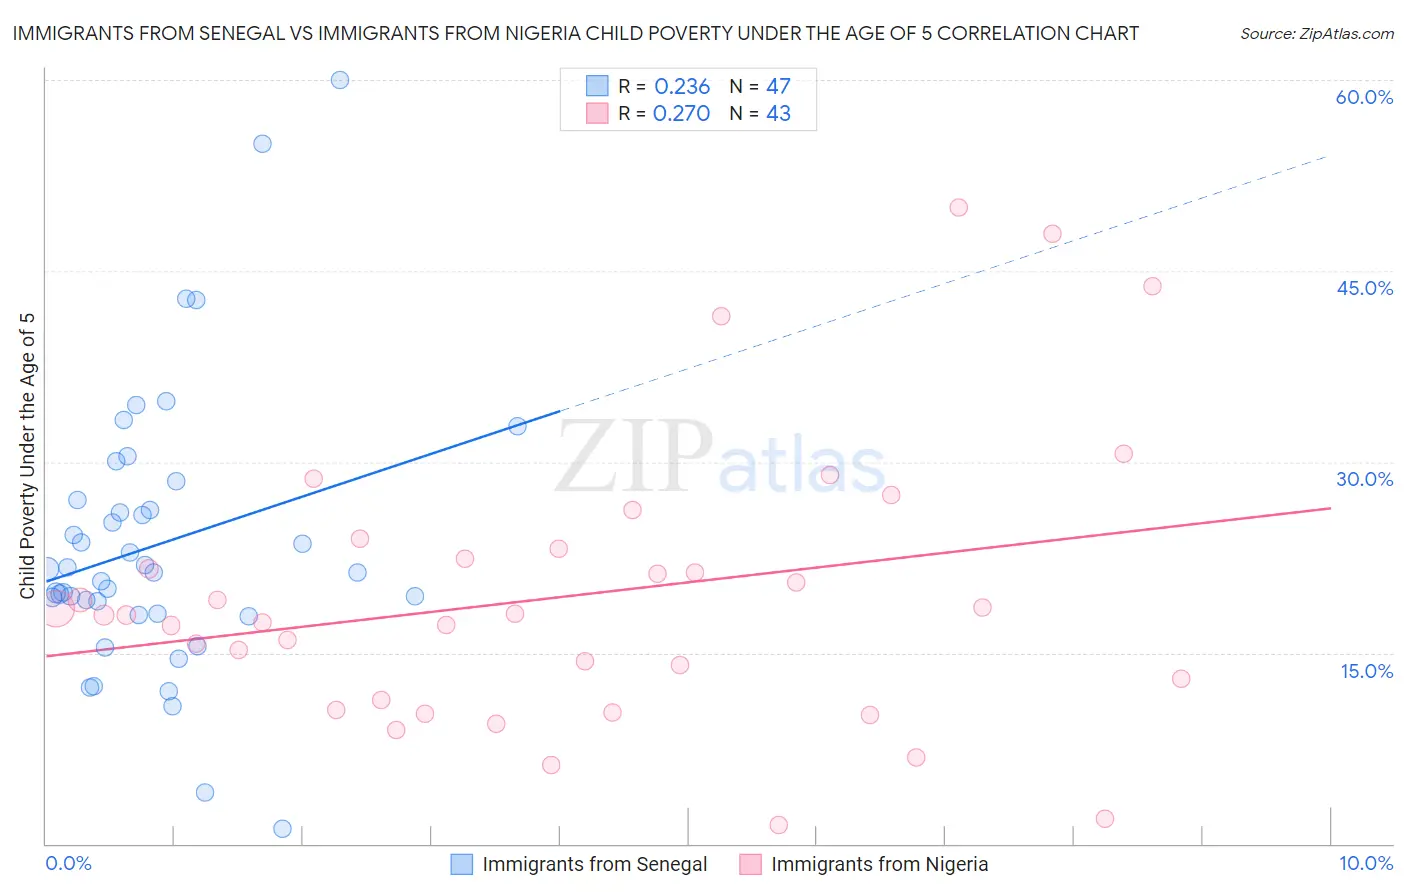 Immigrants from Senegal vs Immigrants from Nigeria Child Poverty Under the Age of 5